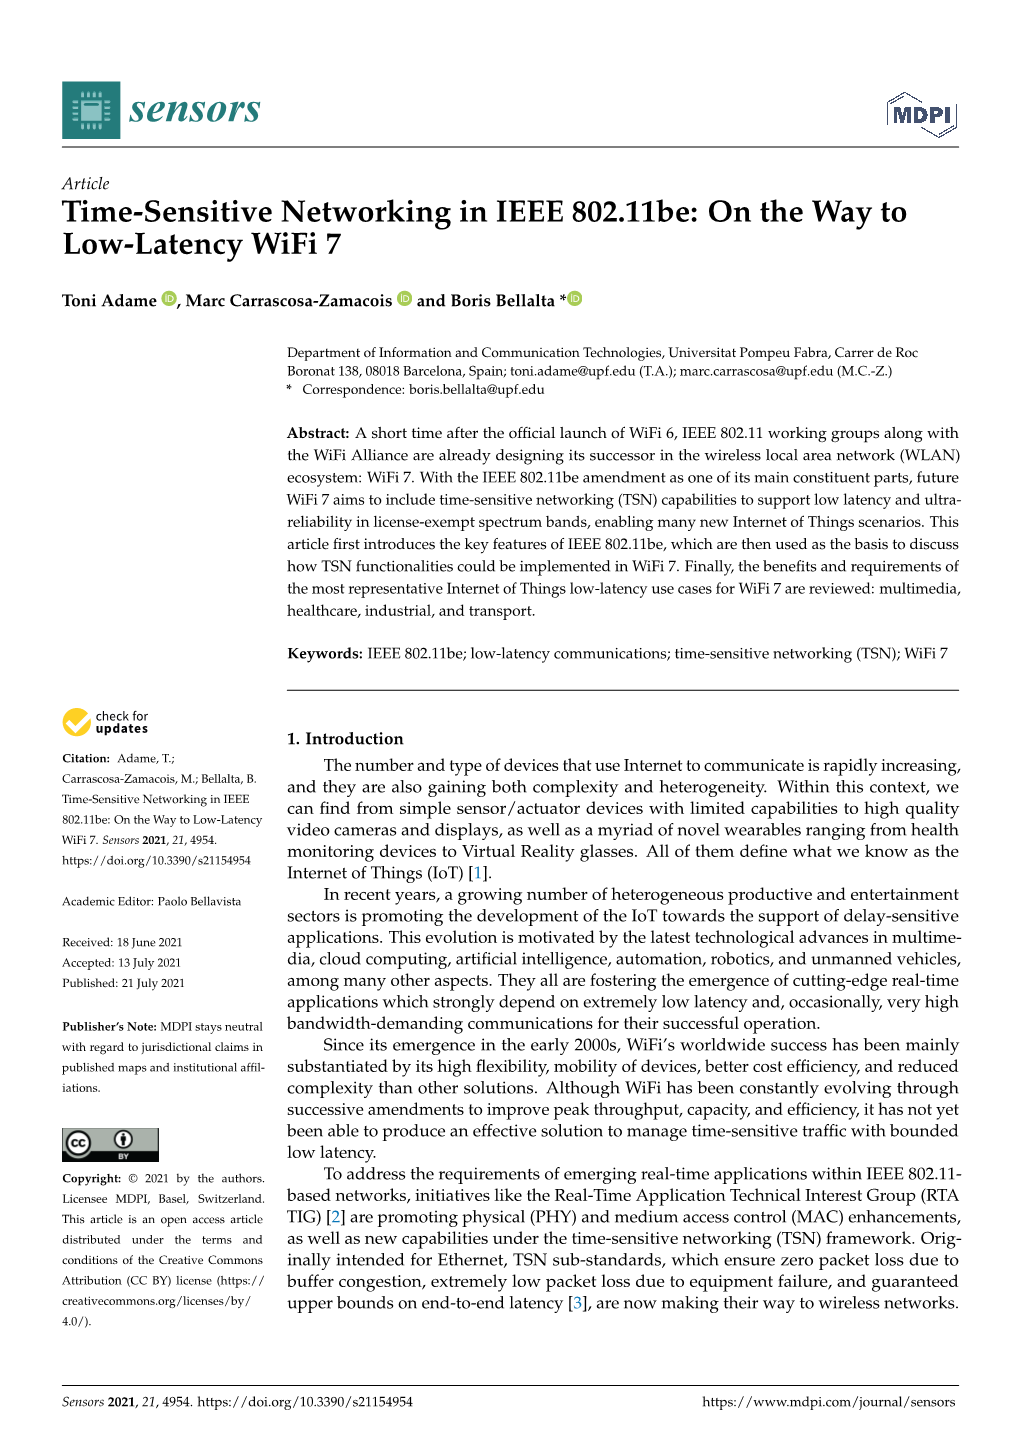 Time-Sensitive Networking in IEEE 802.11Be: on the Way to Low-Latency Wifi 7